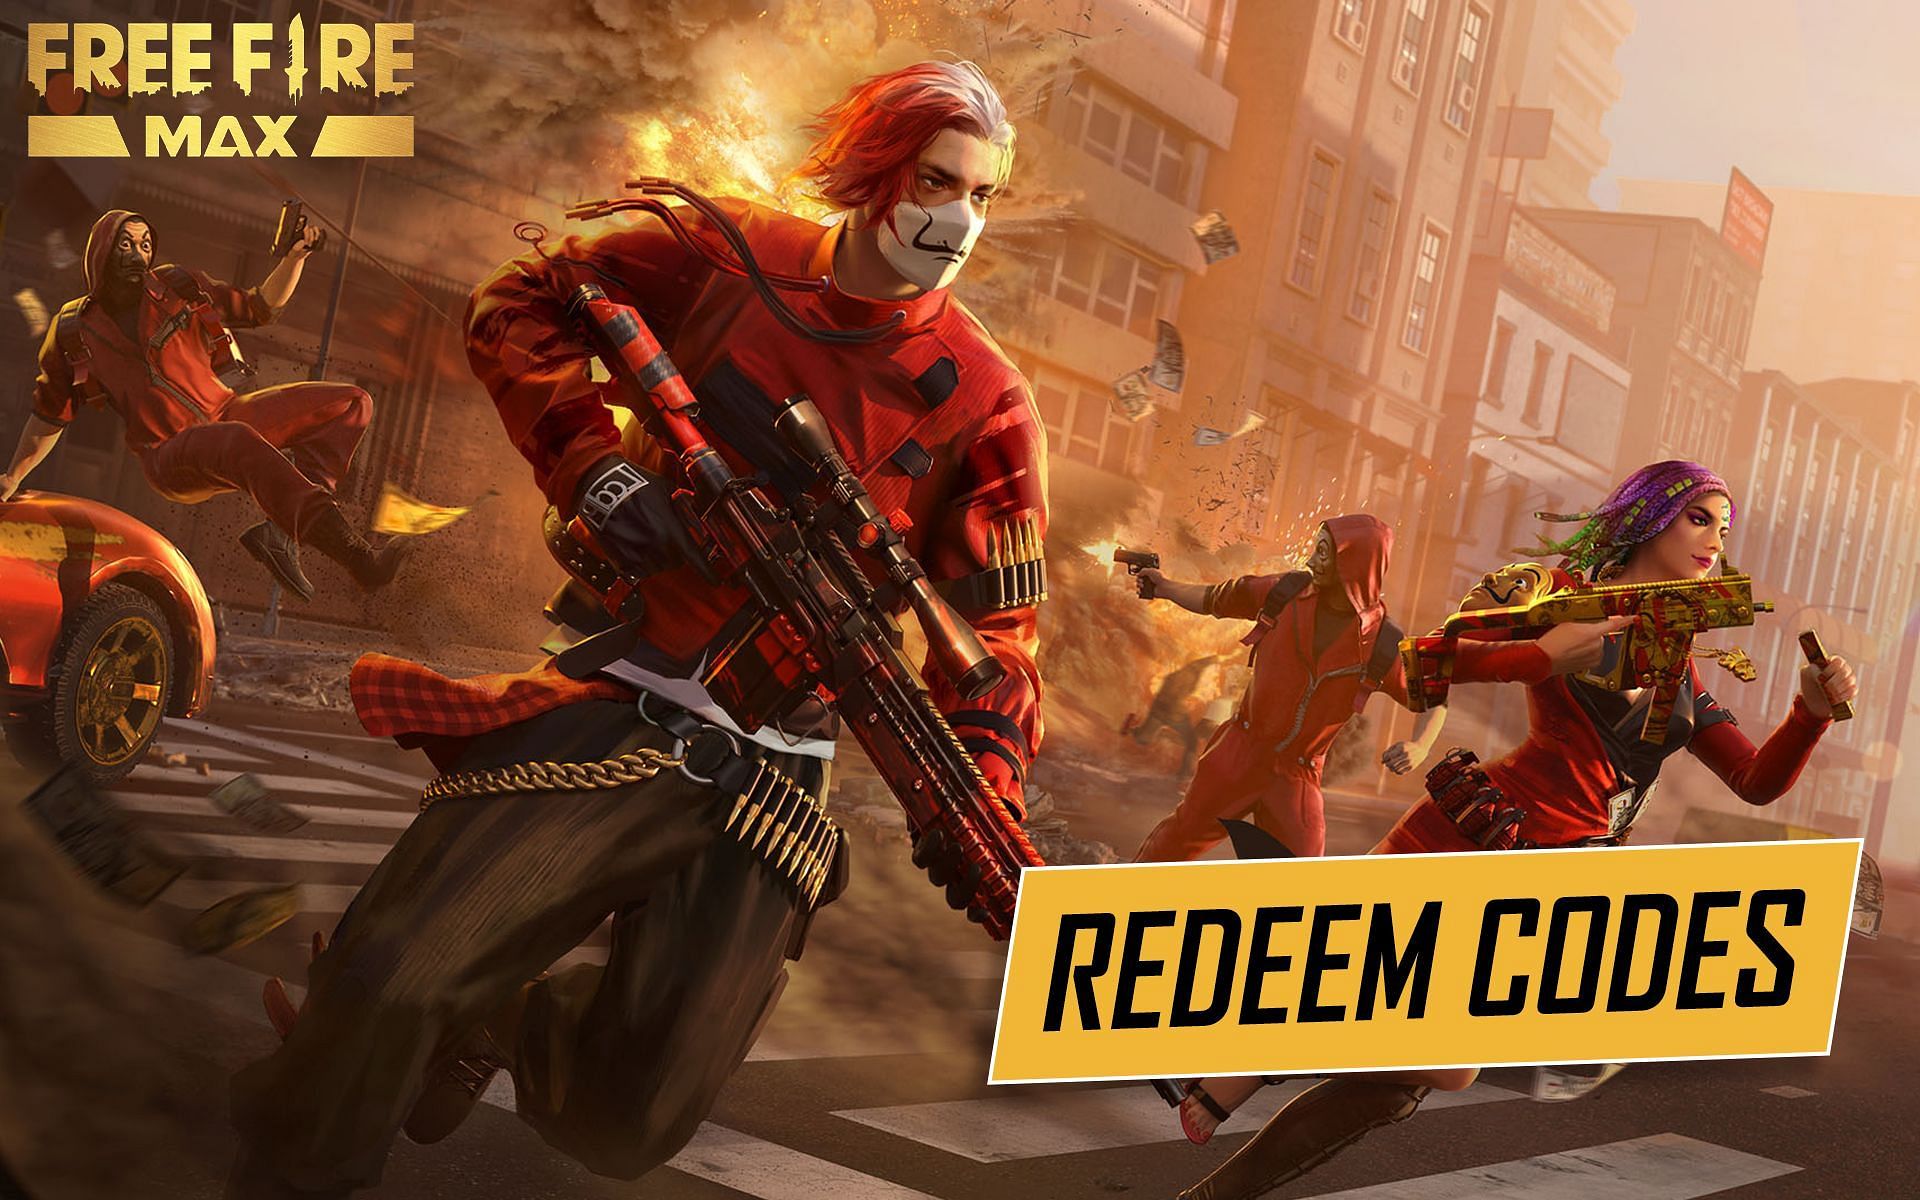 Redeem codes have proven to be a great way to get free rewards in Free Fire MAX (Image via Sportskeeda)